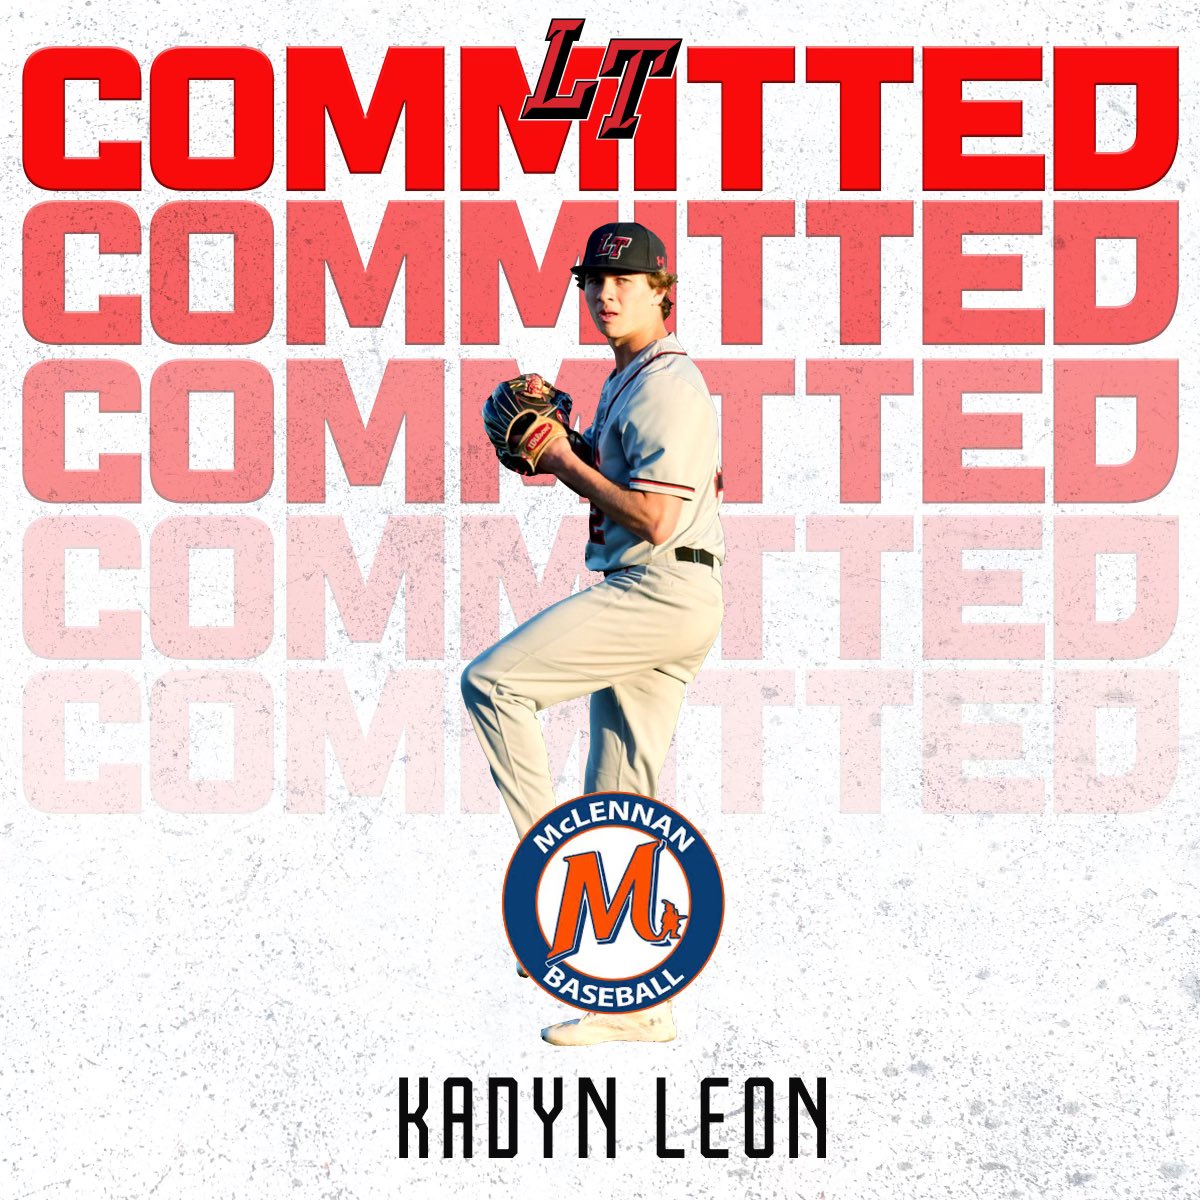 Congratulations to @LeonKadyn on his commitment to McLennan CC! #Together